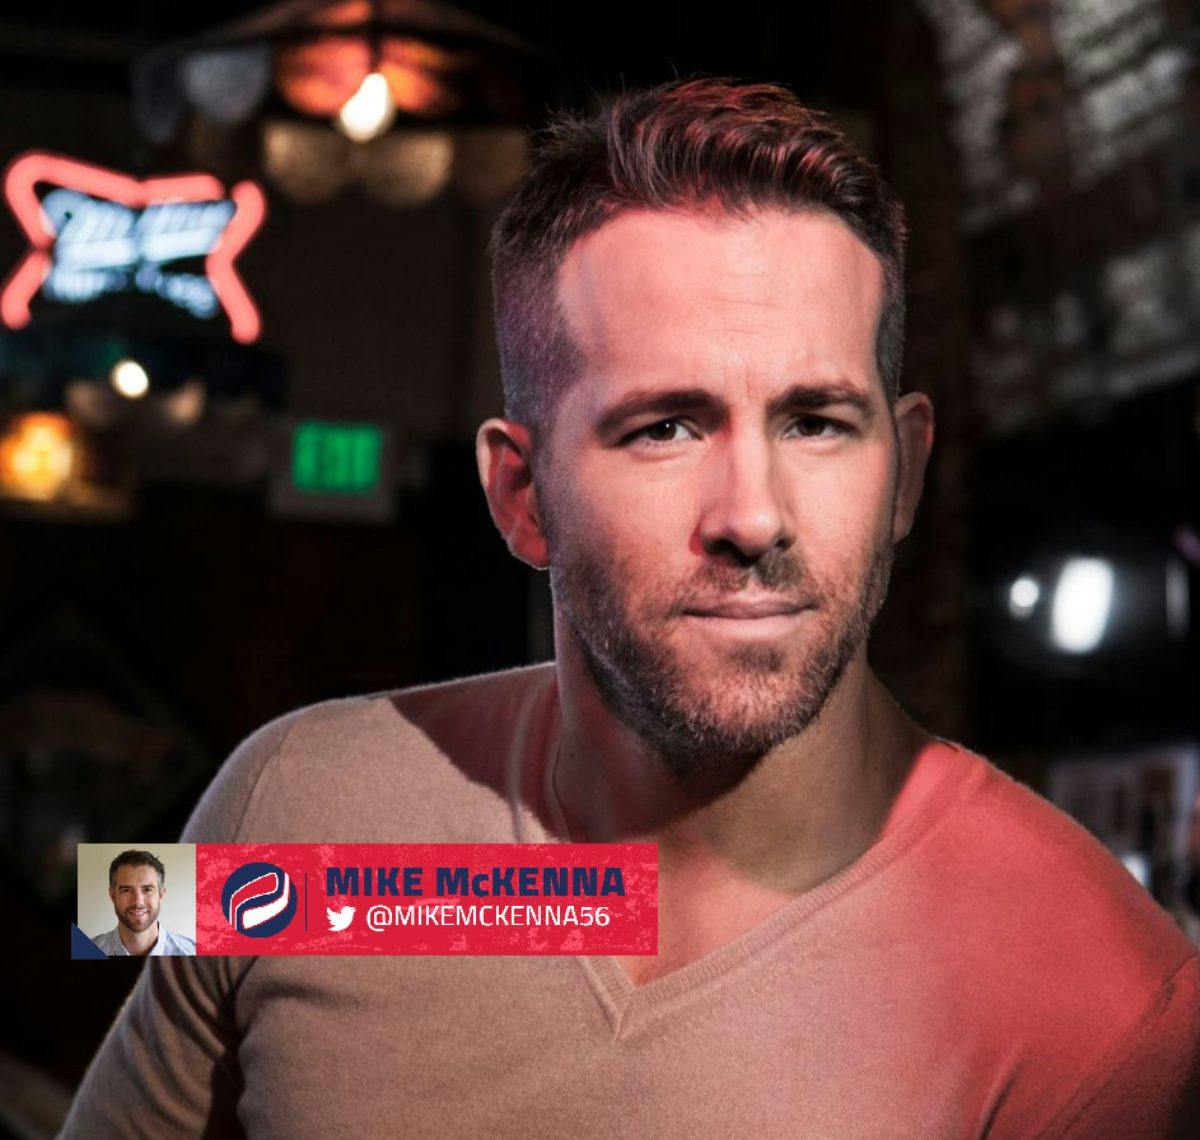 What could Ryan Reynolds do for the Ottawa Senators? I watched